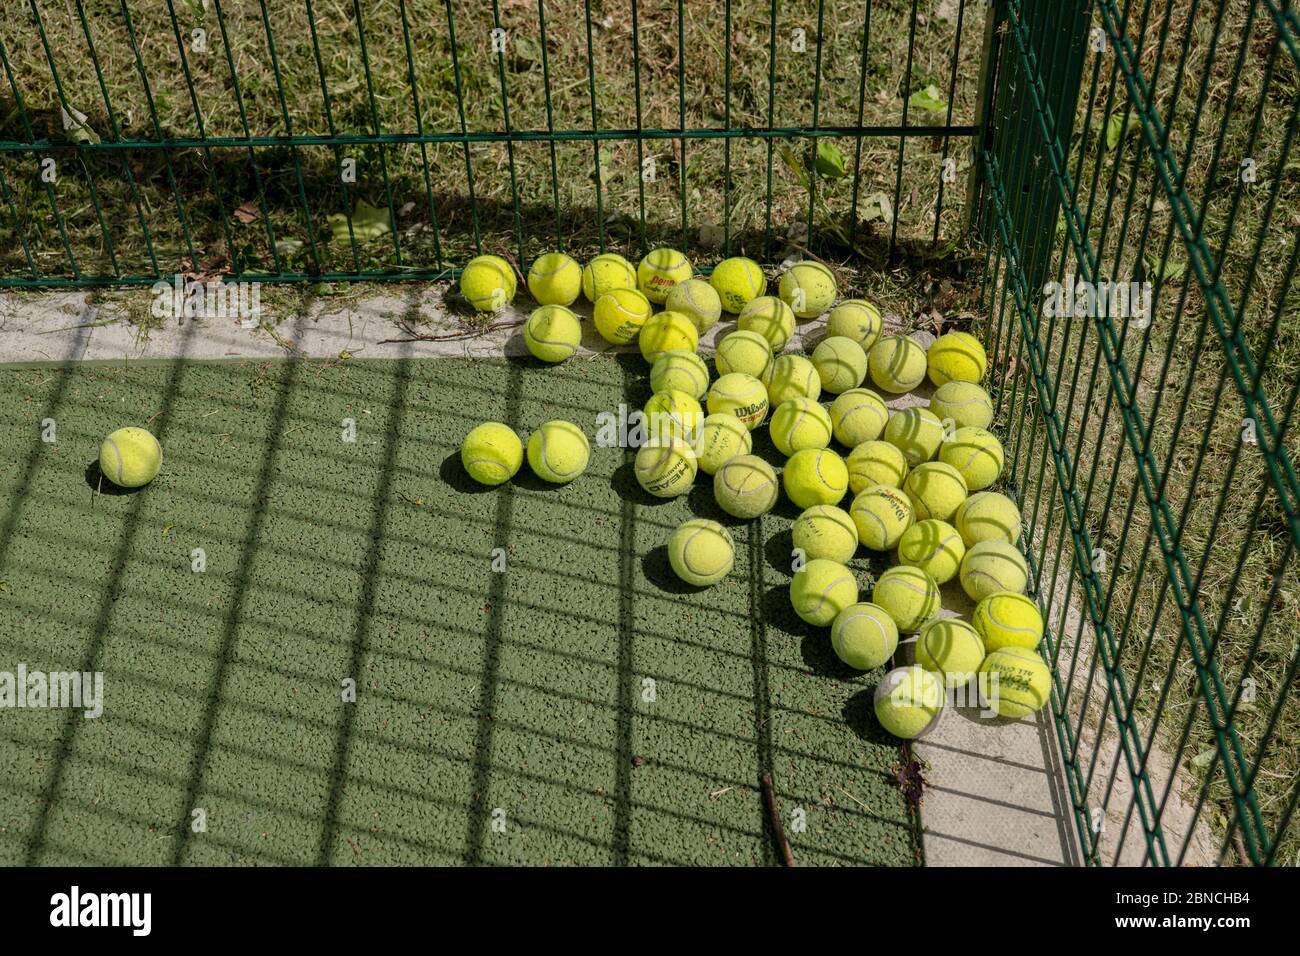 Brockwell Park, UK. 14th May 2020. Tennis balls in Brockwell Park following Government advice that lockdown rules have been relaxed for a small number of sports. Tennis, along with golf and basketball, have been cited as a sport that can be played safely, while keeping two metres apart. Brockwell Park is a 50.8 hectare park located south of Brixton, in Herne Hill and Tulse Hill in south London. (photo by Sam Mellish / Alamy Live News) Stock Photo